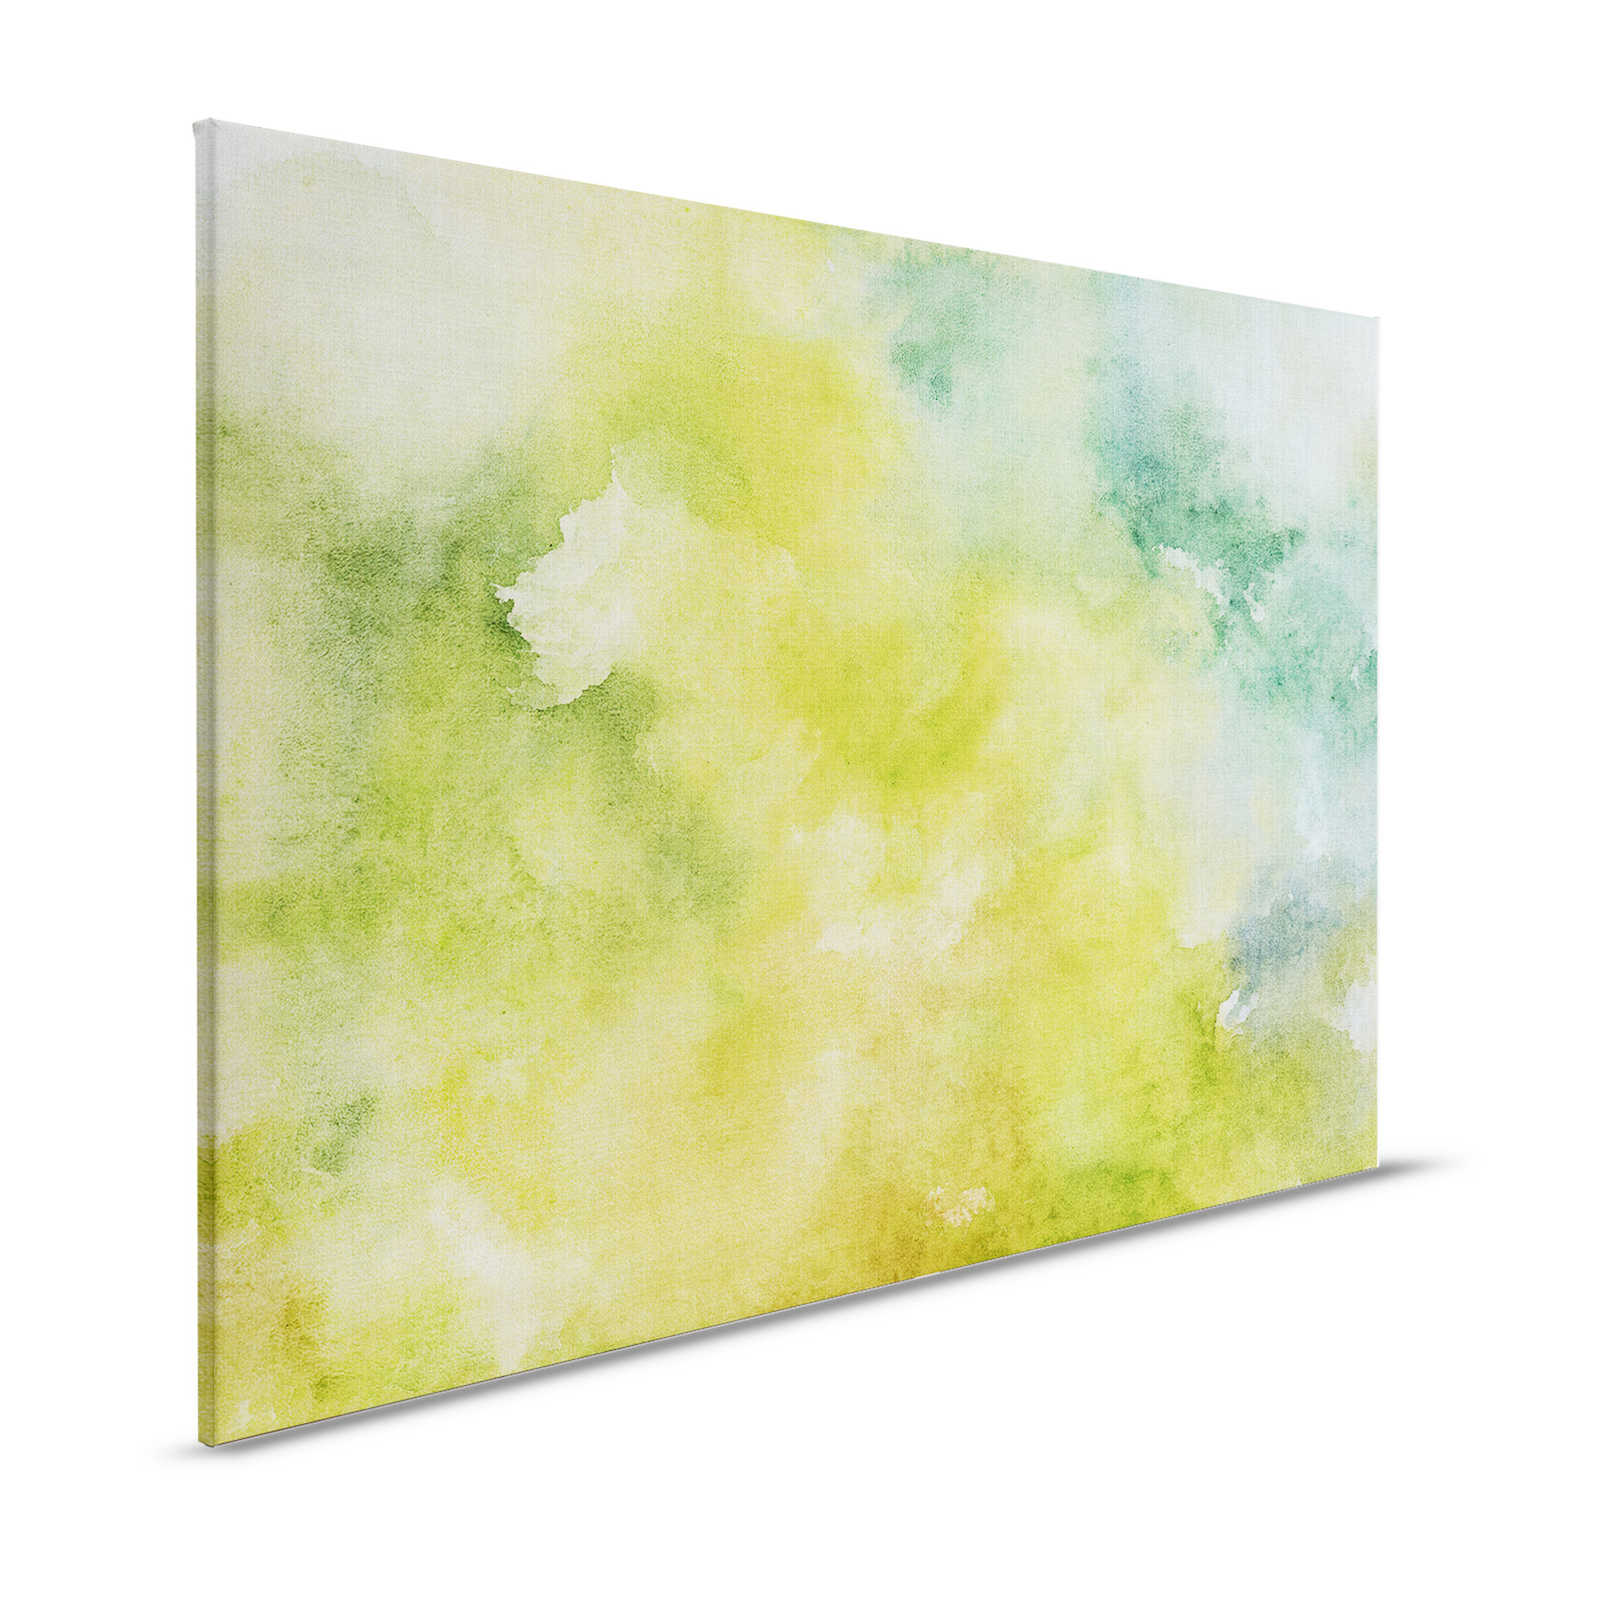 Watercolours 3 - Green watercolour motif as canvas picture in natural linen look - 1.20 m x 0.80 m
